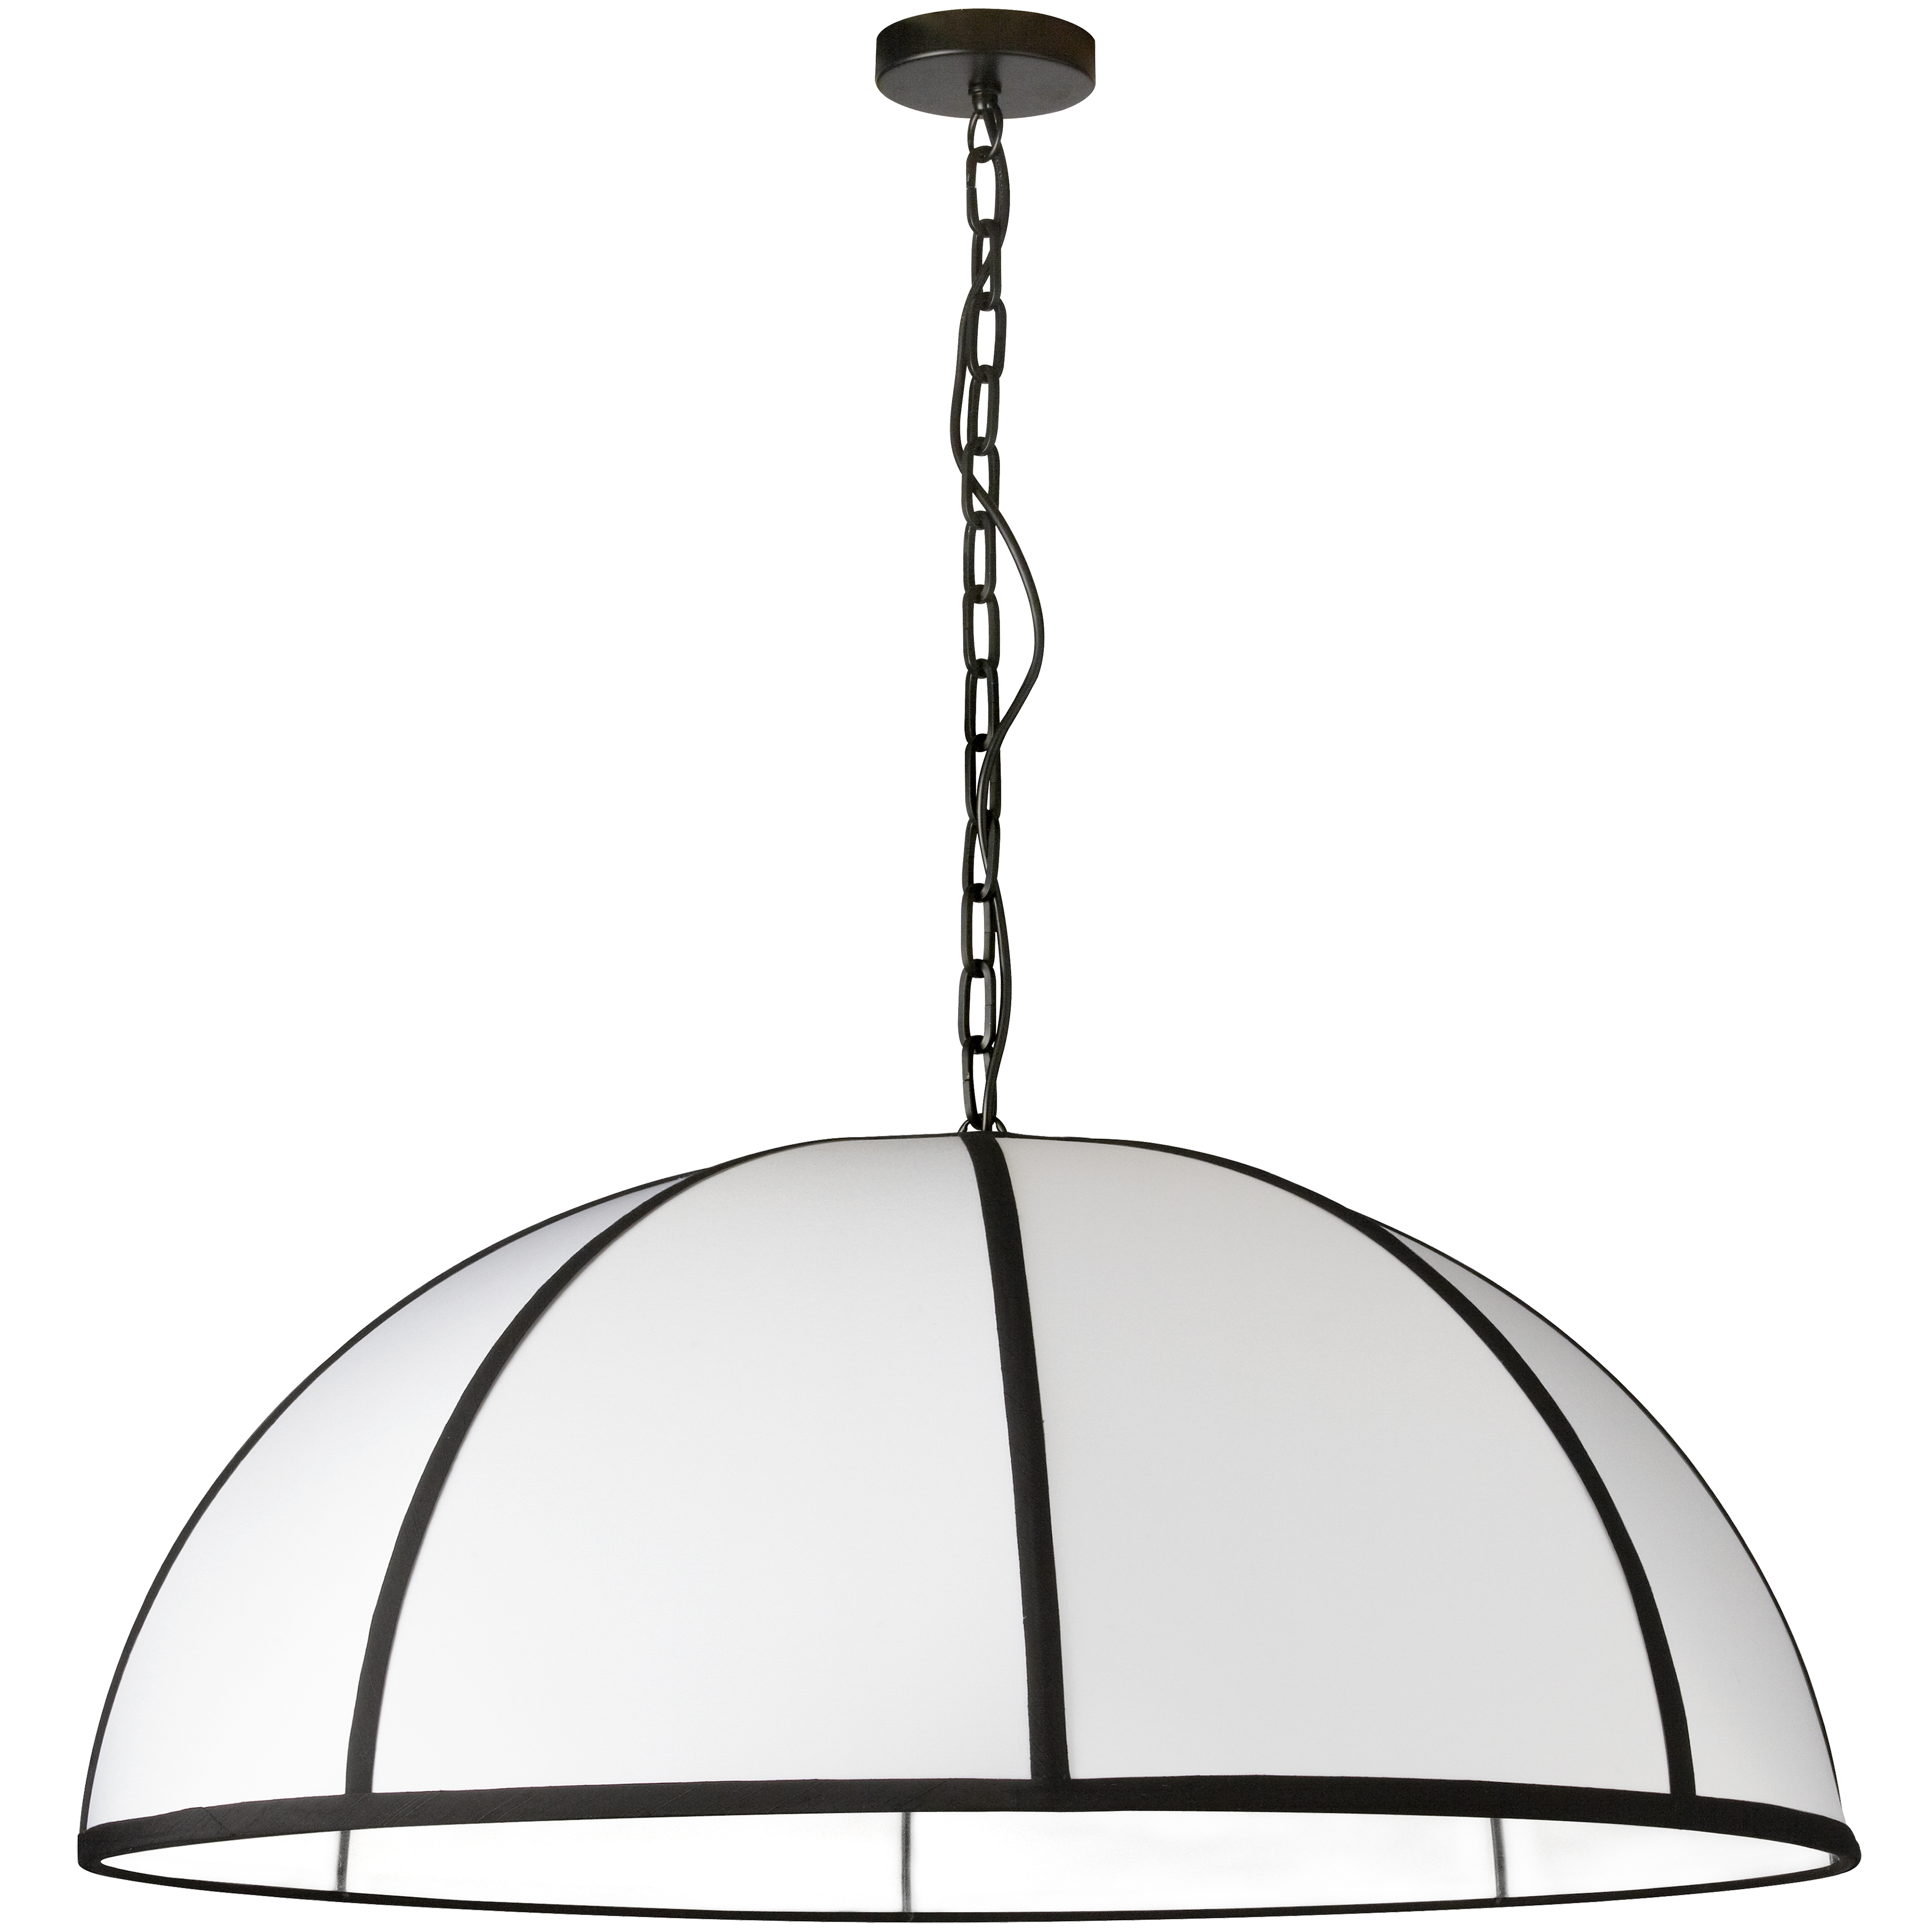 Attention to detail creates a fashion statement out of the classic drum shape in the Portobello family of lighting. Like its culinary namesake, the generous proportions of an inverted drum shape gives Portobello lighting a spacious feel. The metal frame in matte black matches trim that creates a segmented look on the fabric shade. A variety of fabric color options add a captivating contrast to the design. Available in a variety of sizes, and with its classic look, Portobello lighting is suitable for kitchens, living rooms and office spaces.